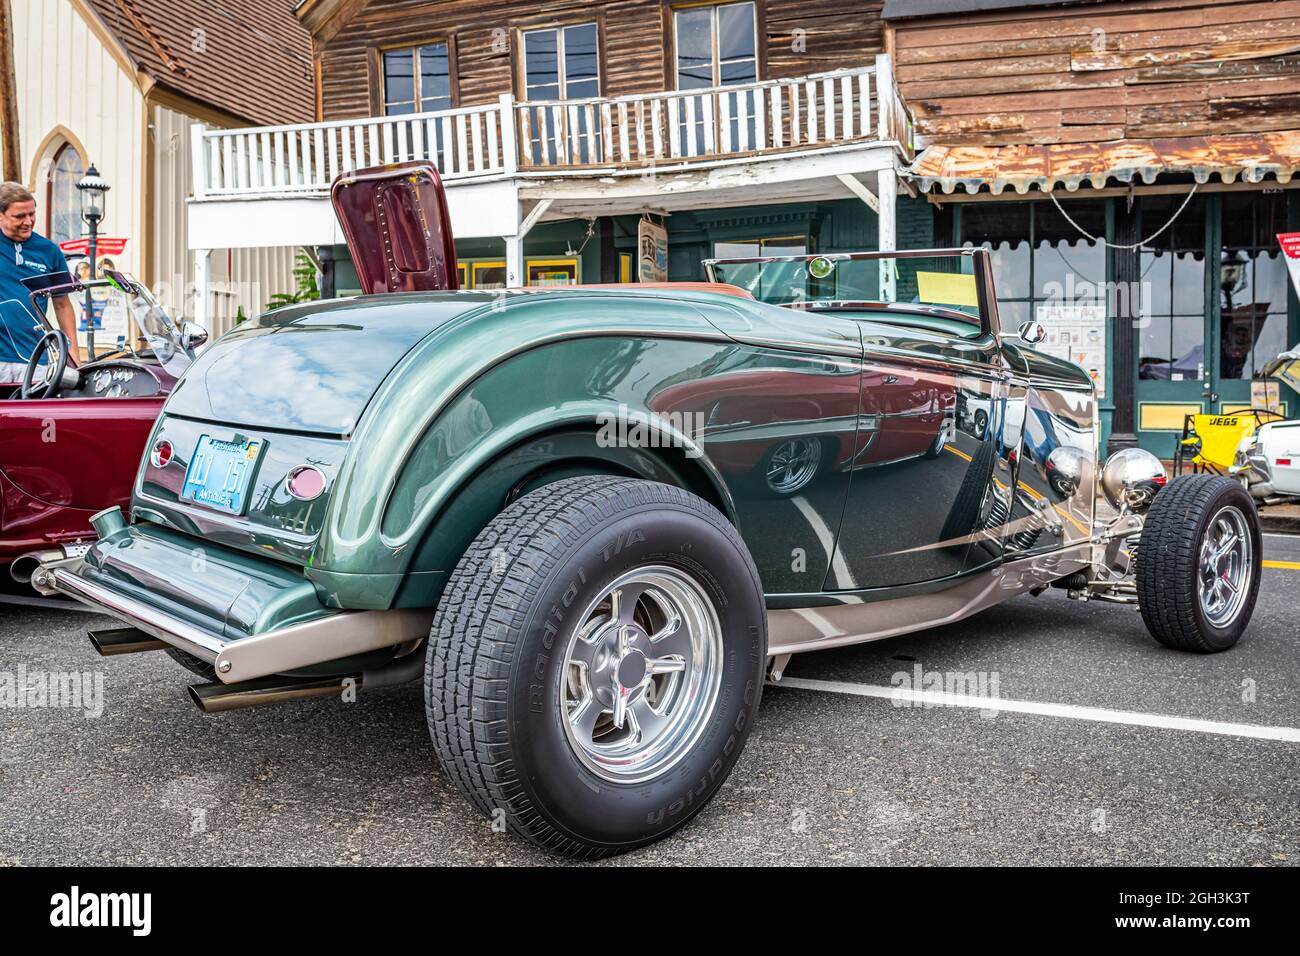 Virginia City, NV - July 30, 2021: Customized 1932 Ford Roadster at a local car show. Stock Photo